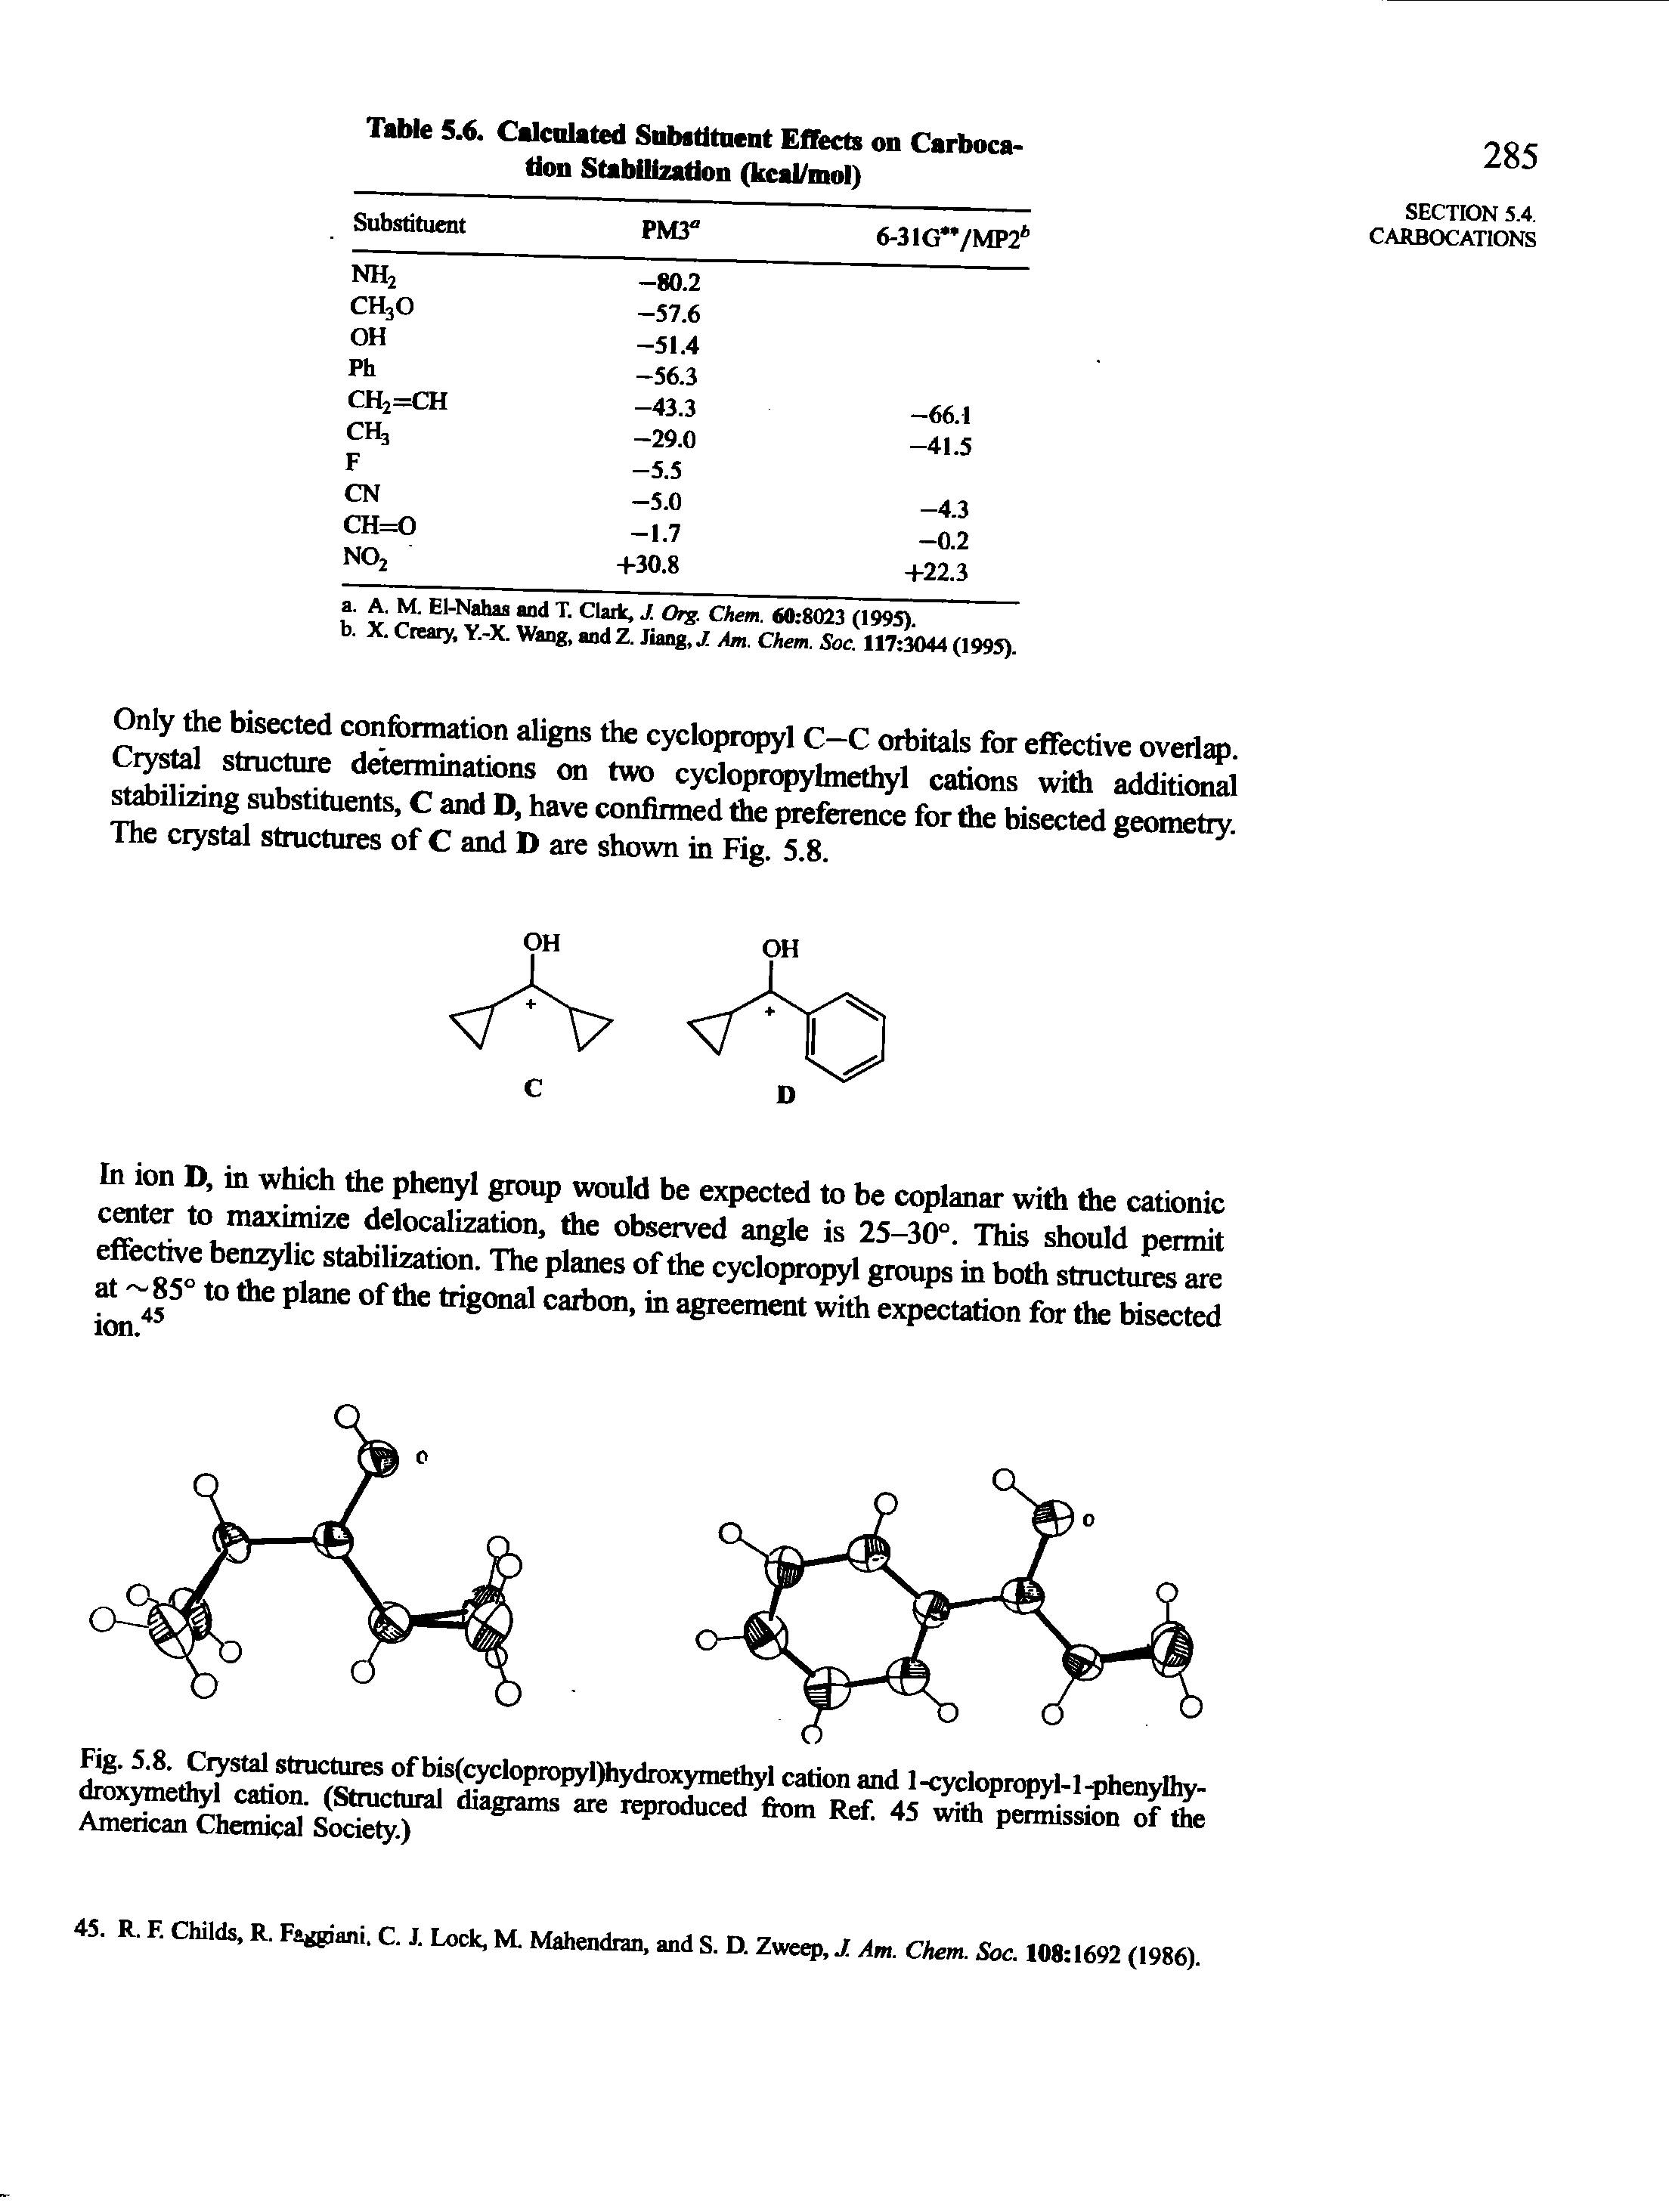 Fig. 5.8. Crystal structures of bis(cyclopropyl)hydroxymethyl cation and 1-cyclopropyl-1-phenylhy-drox methyi cation. (Stmctural diagrams are rqrroduced from Ref 45 with permission of the American Chemical Society.)...